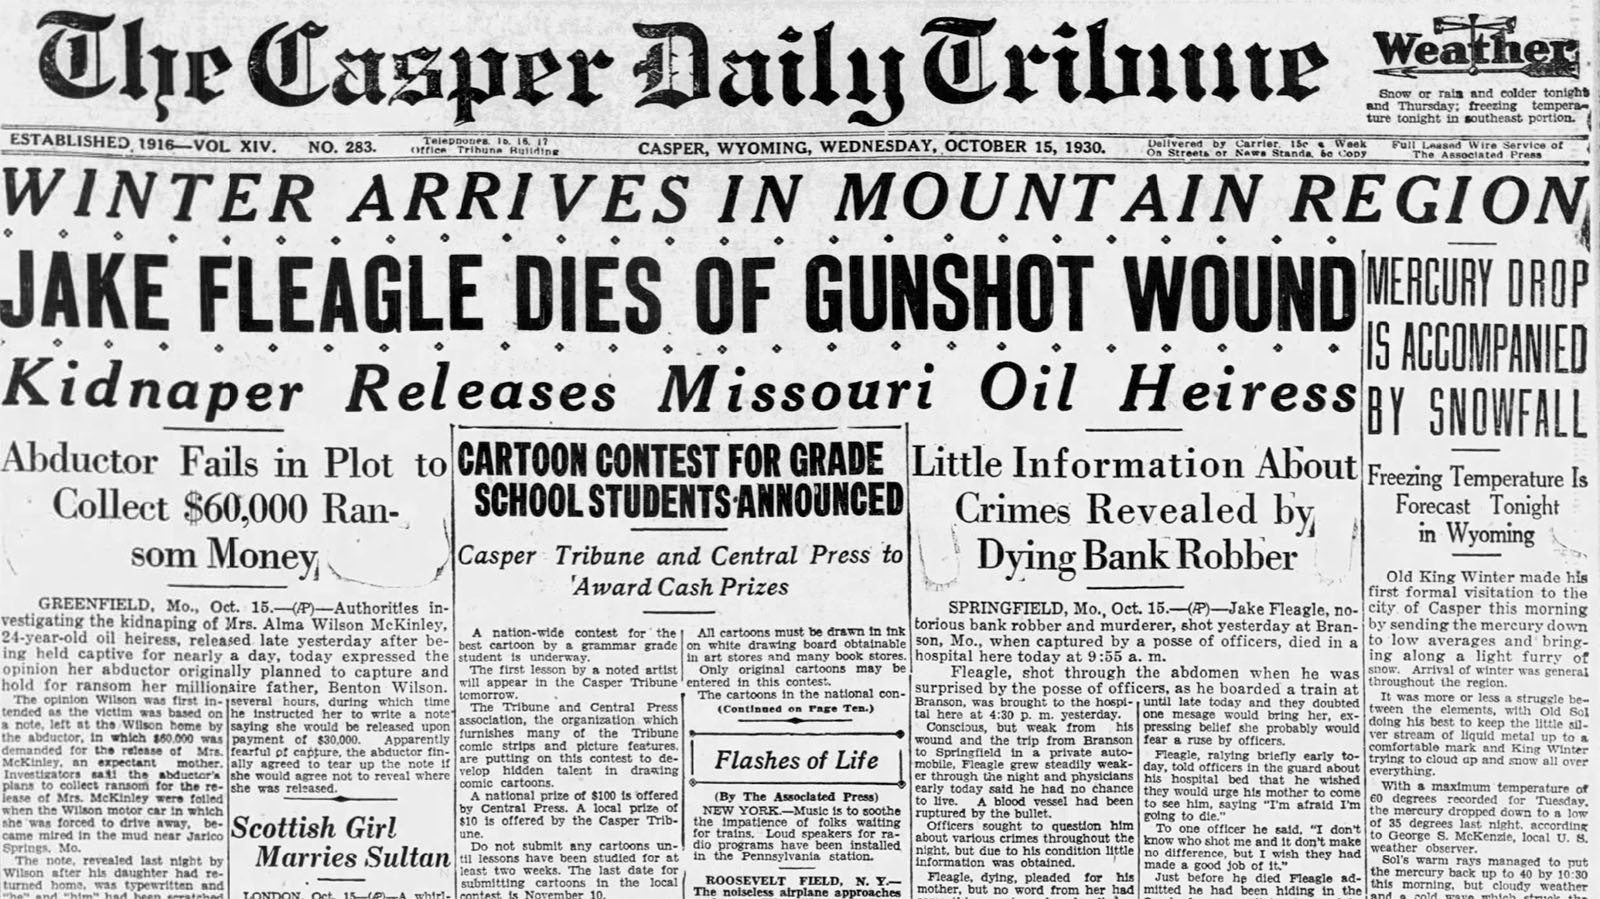 Headlines in Casper newspapers in the early 1930s were filled with reports about bank robberies.